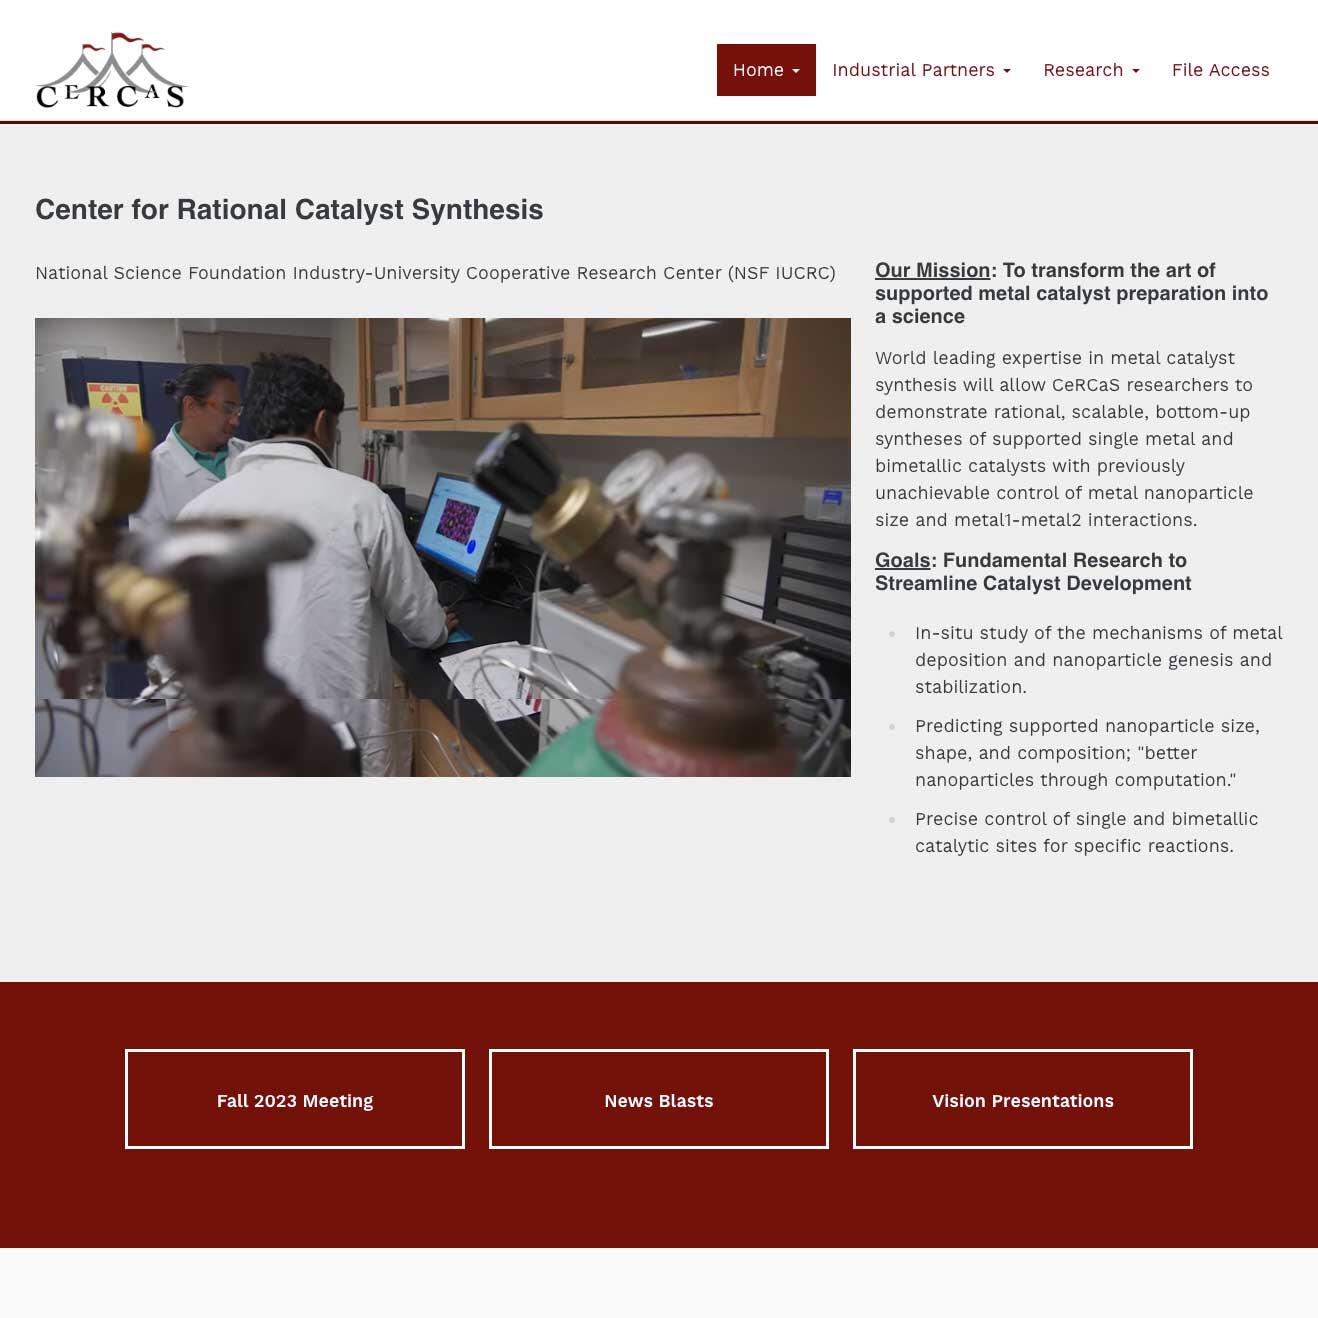 Center for Rational Catalyst Synthesis website